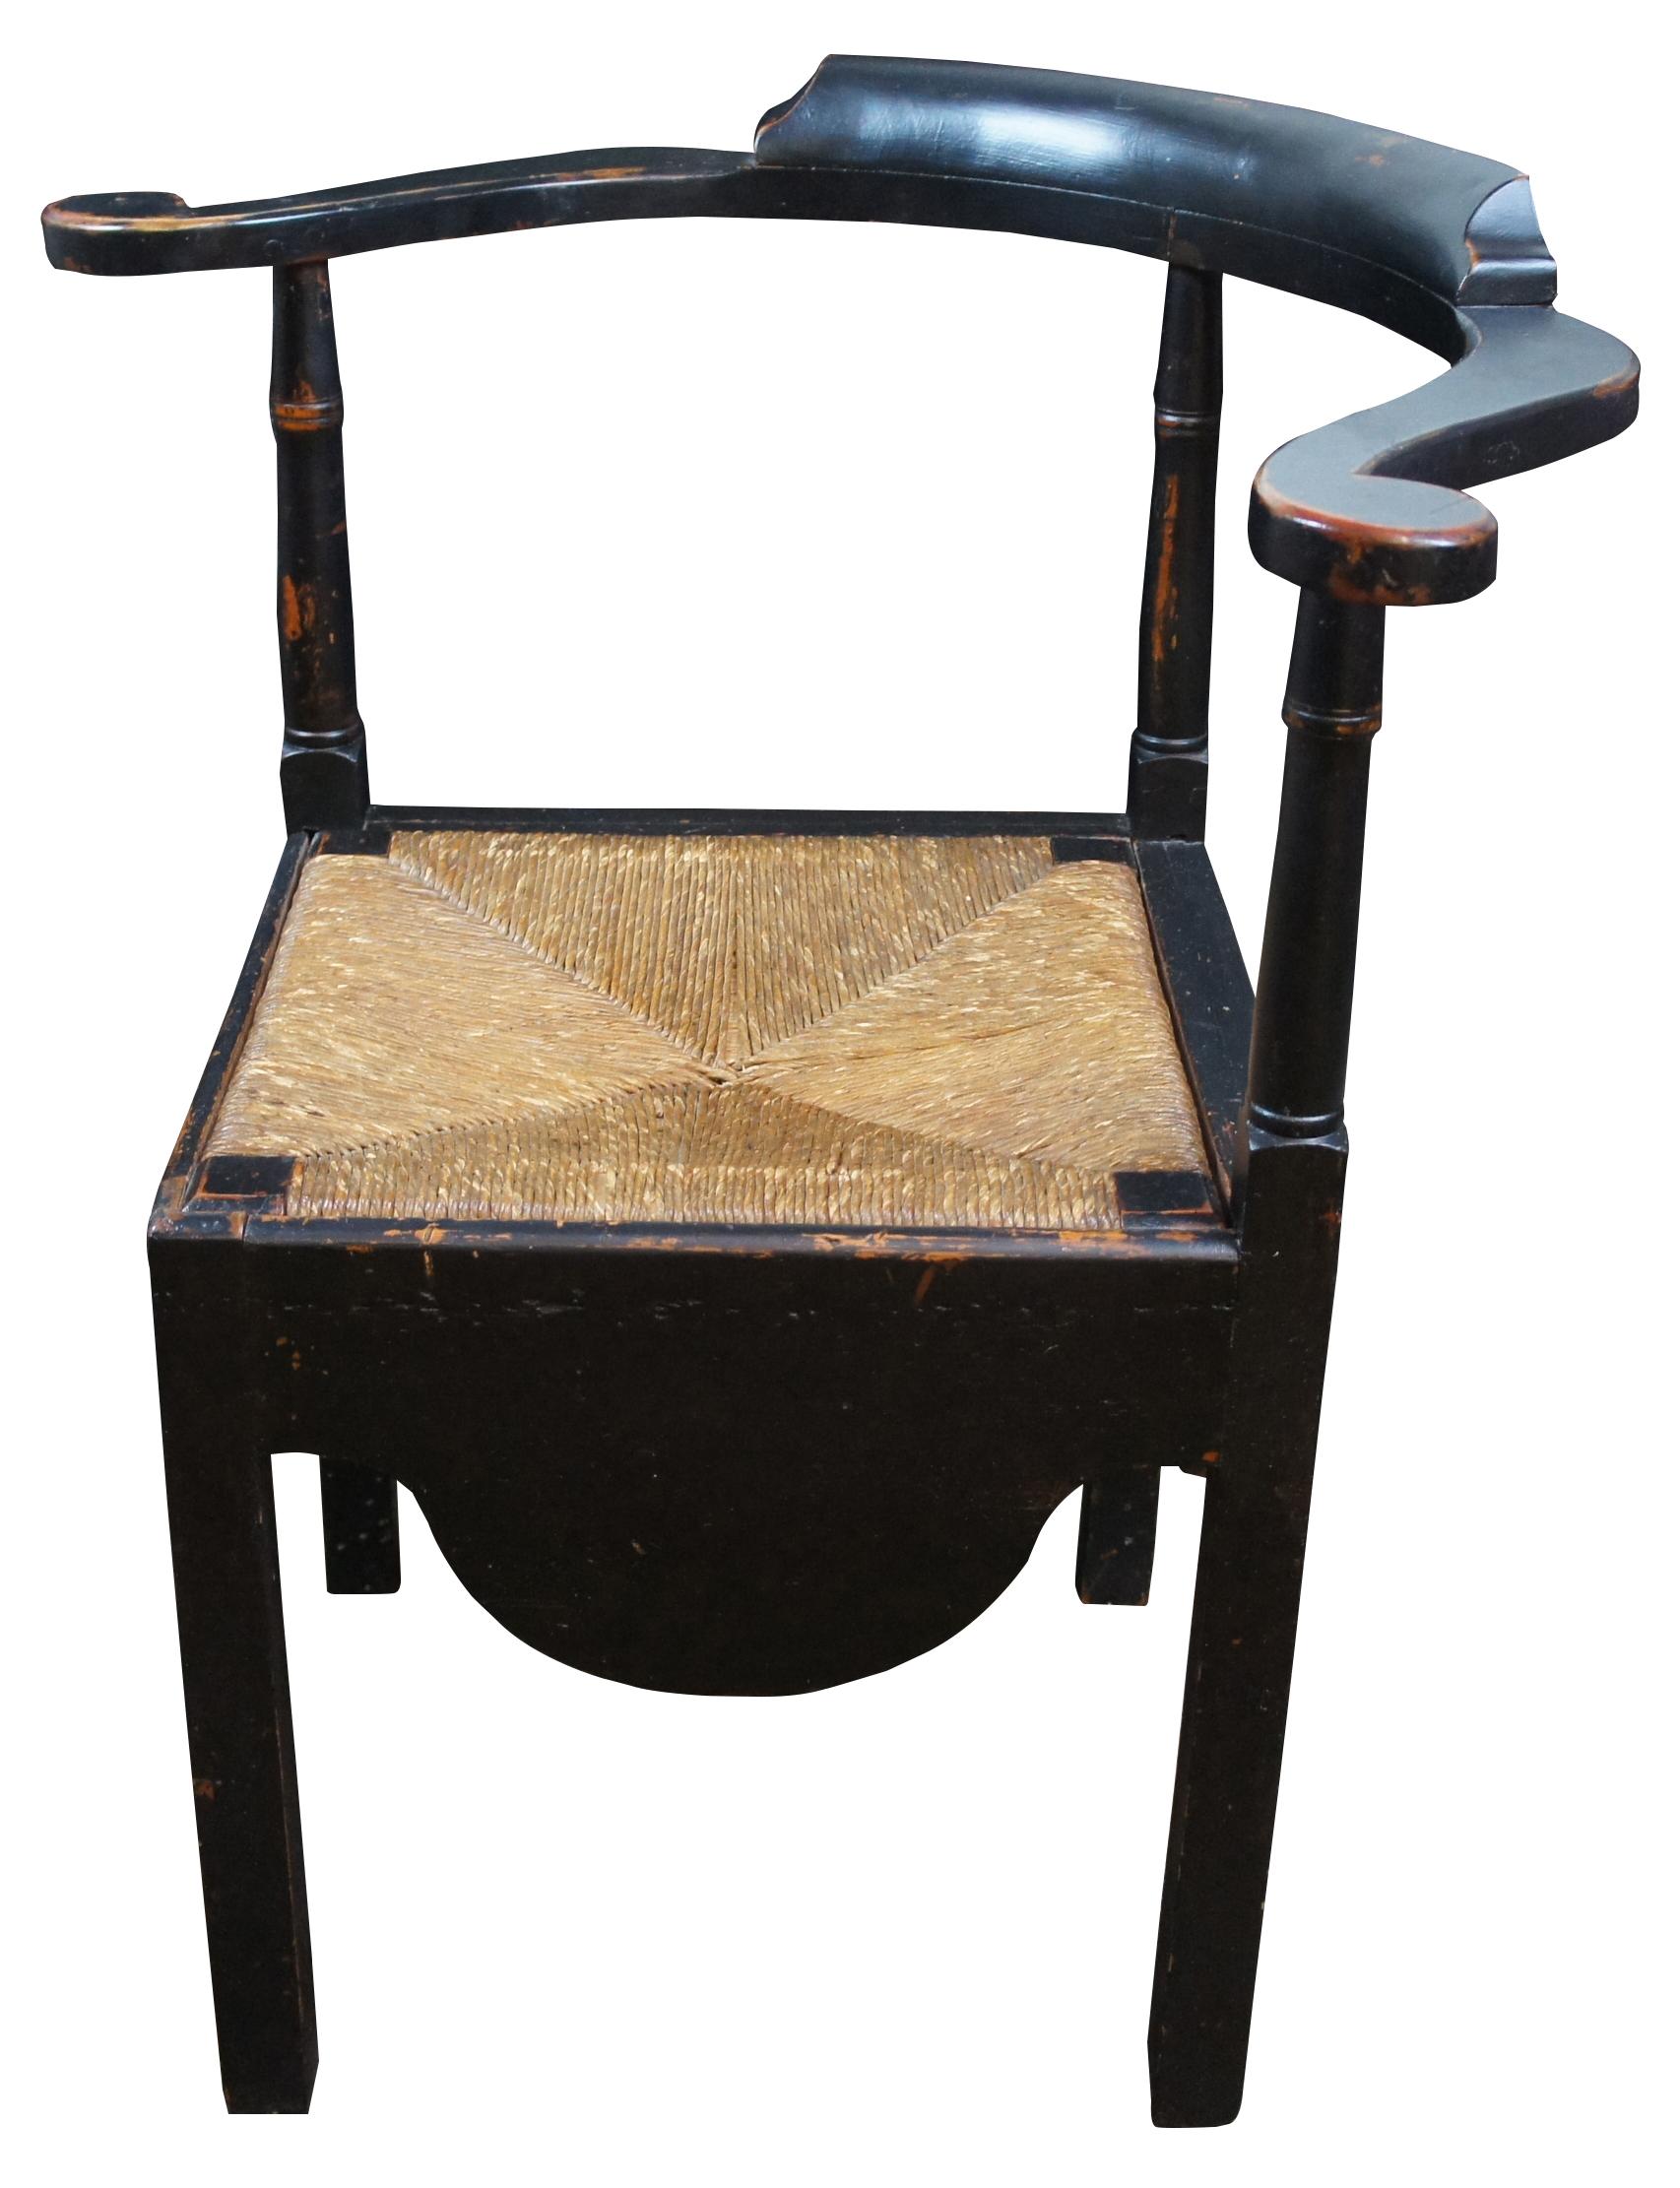 Antique Early American corner chair. Features rush seat and a curved crest with molding, finished in black with naturally distressed finish.

Seat corner to corner – 22.25”.